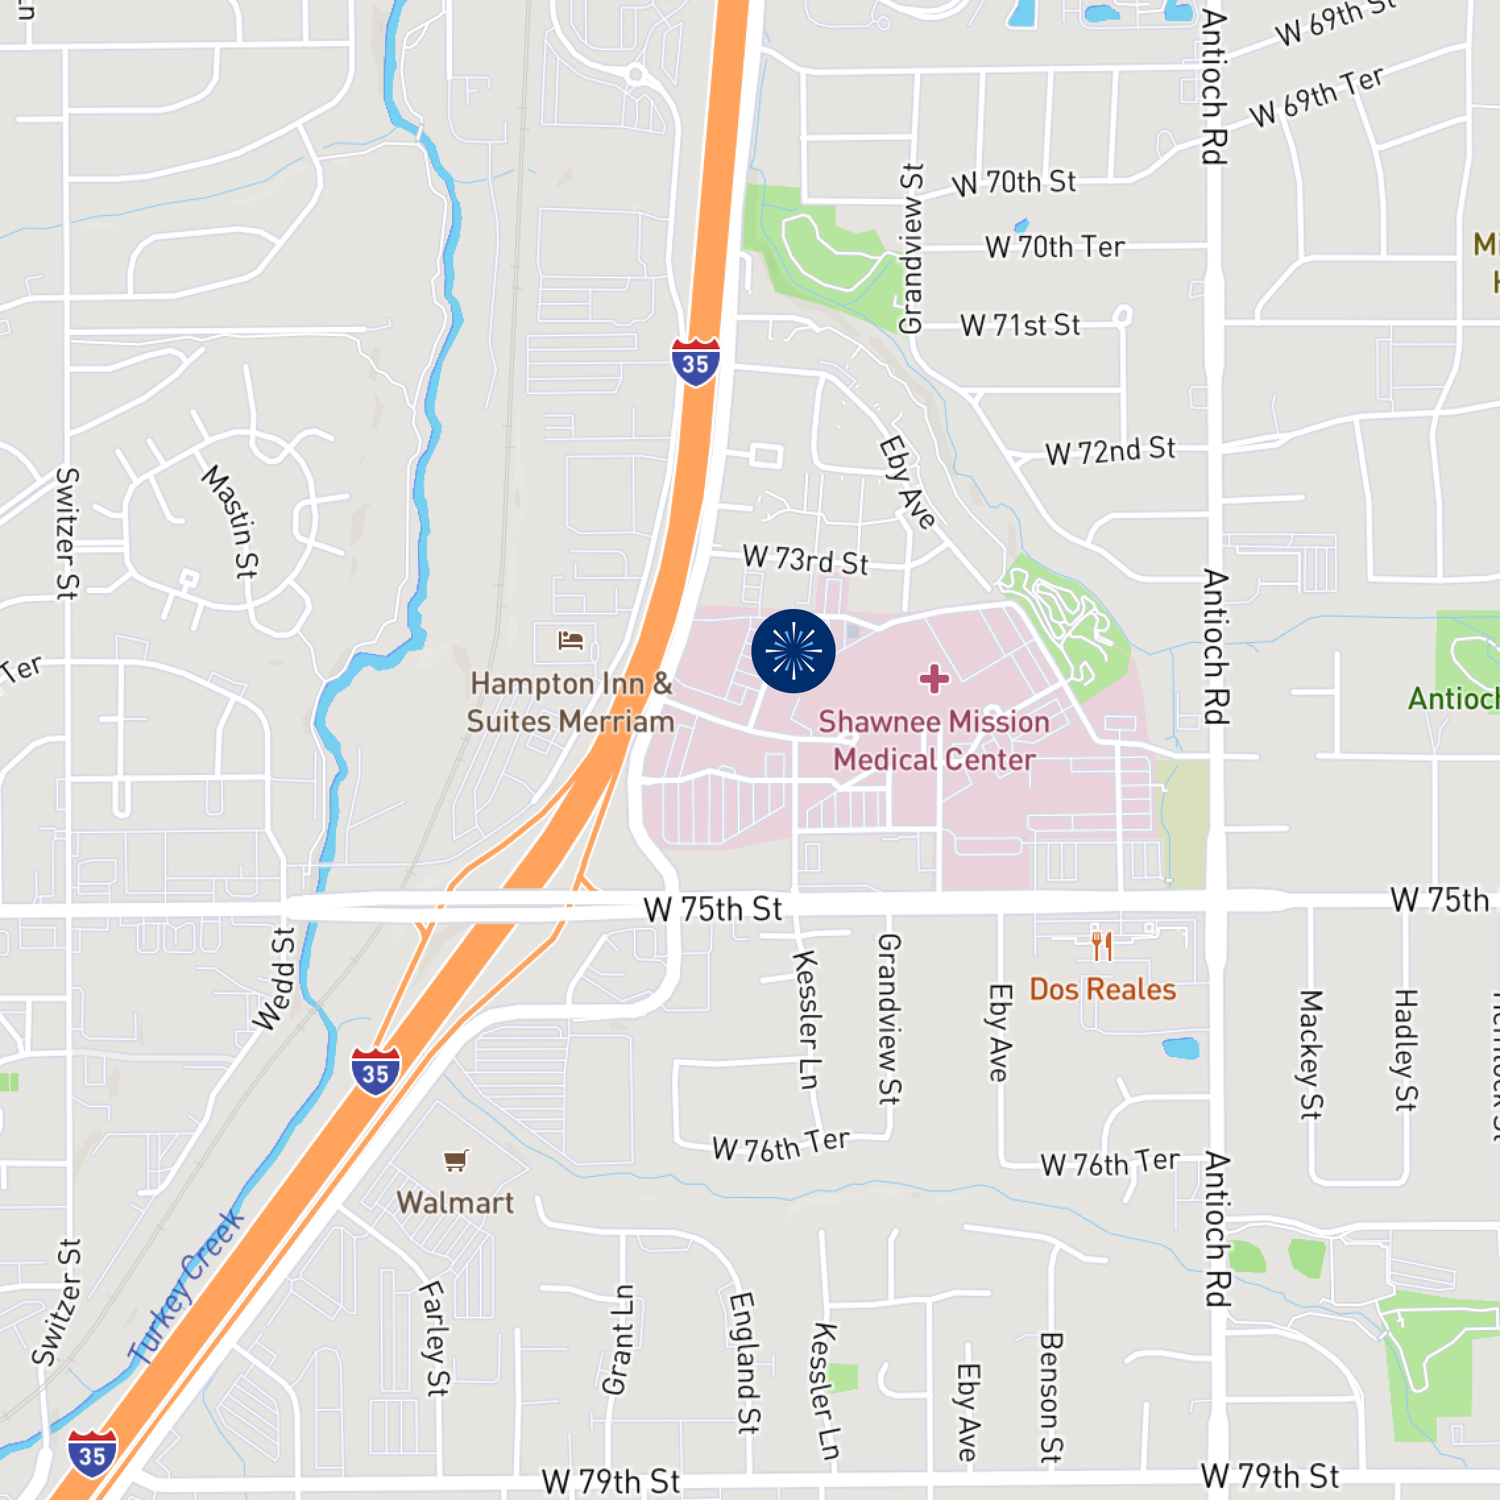 Map showing location of Kansas City Skin and Cancer Center. It is next to Shawnee Mission Medical Center.